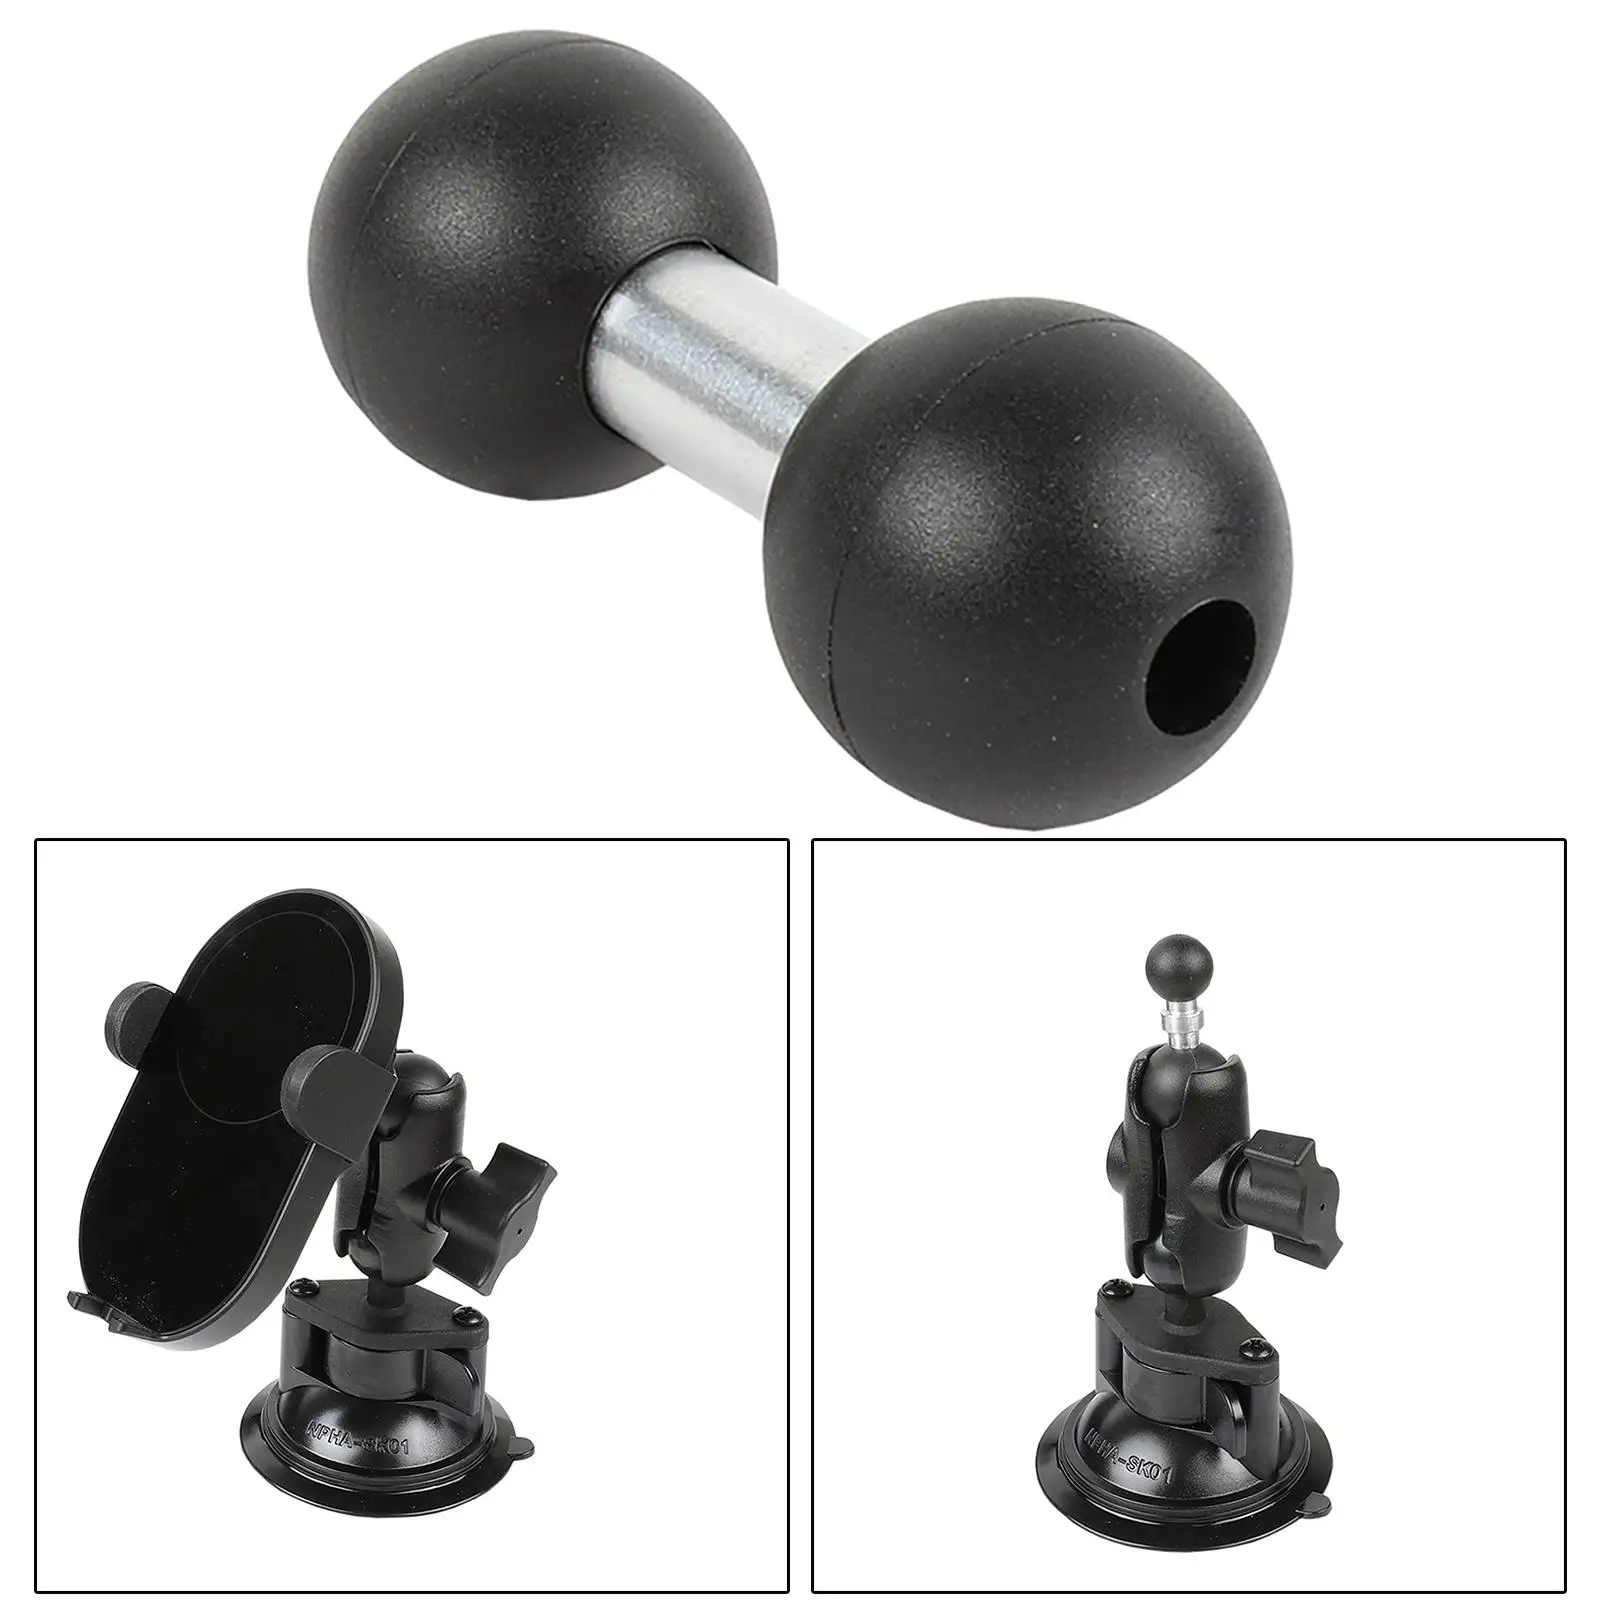 Composite Ball Adapter Accessories Rubber Stainless Steel Dual Ball Socket Mounting  for  Standard  GPS